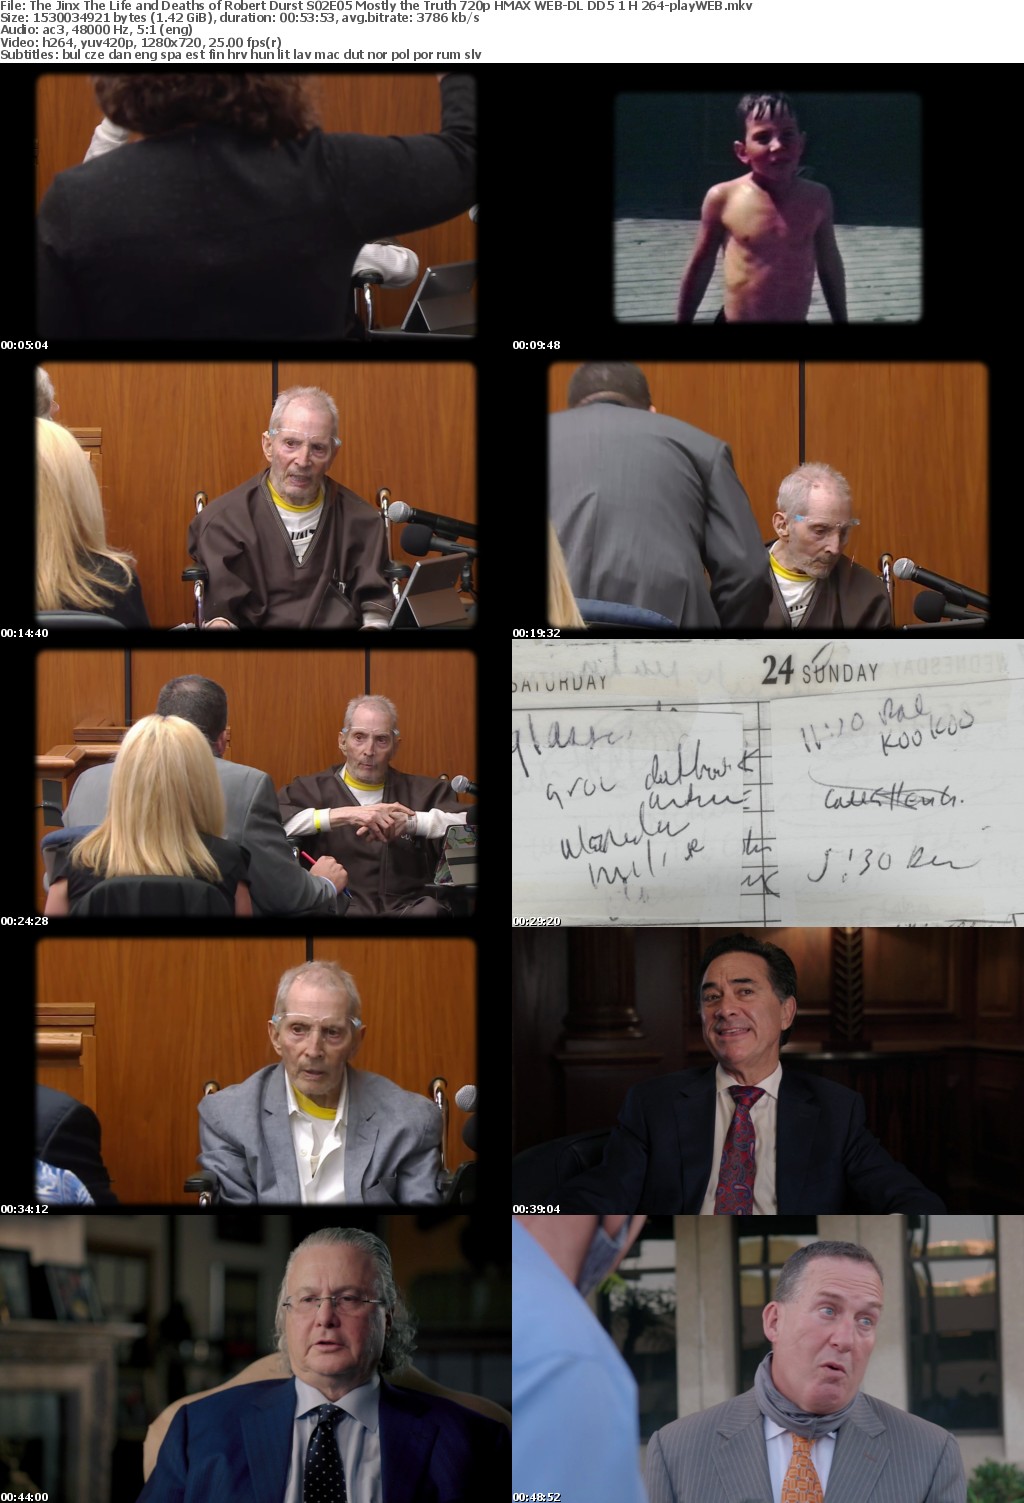 The Jinx The Life and Deaths of Robert Durst S02E05 Mostly the Truth 720p HMAX WEB-DL DD5 1 H 264-playWEB